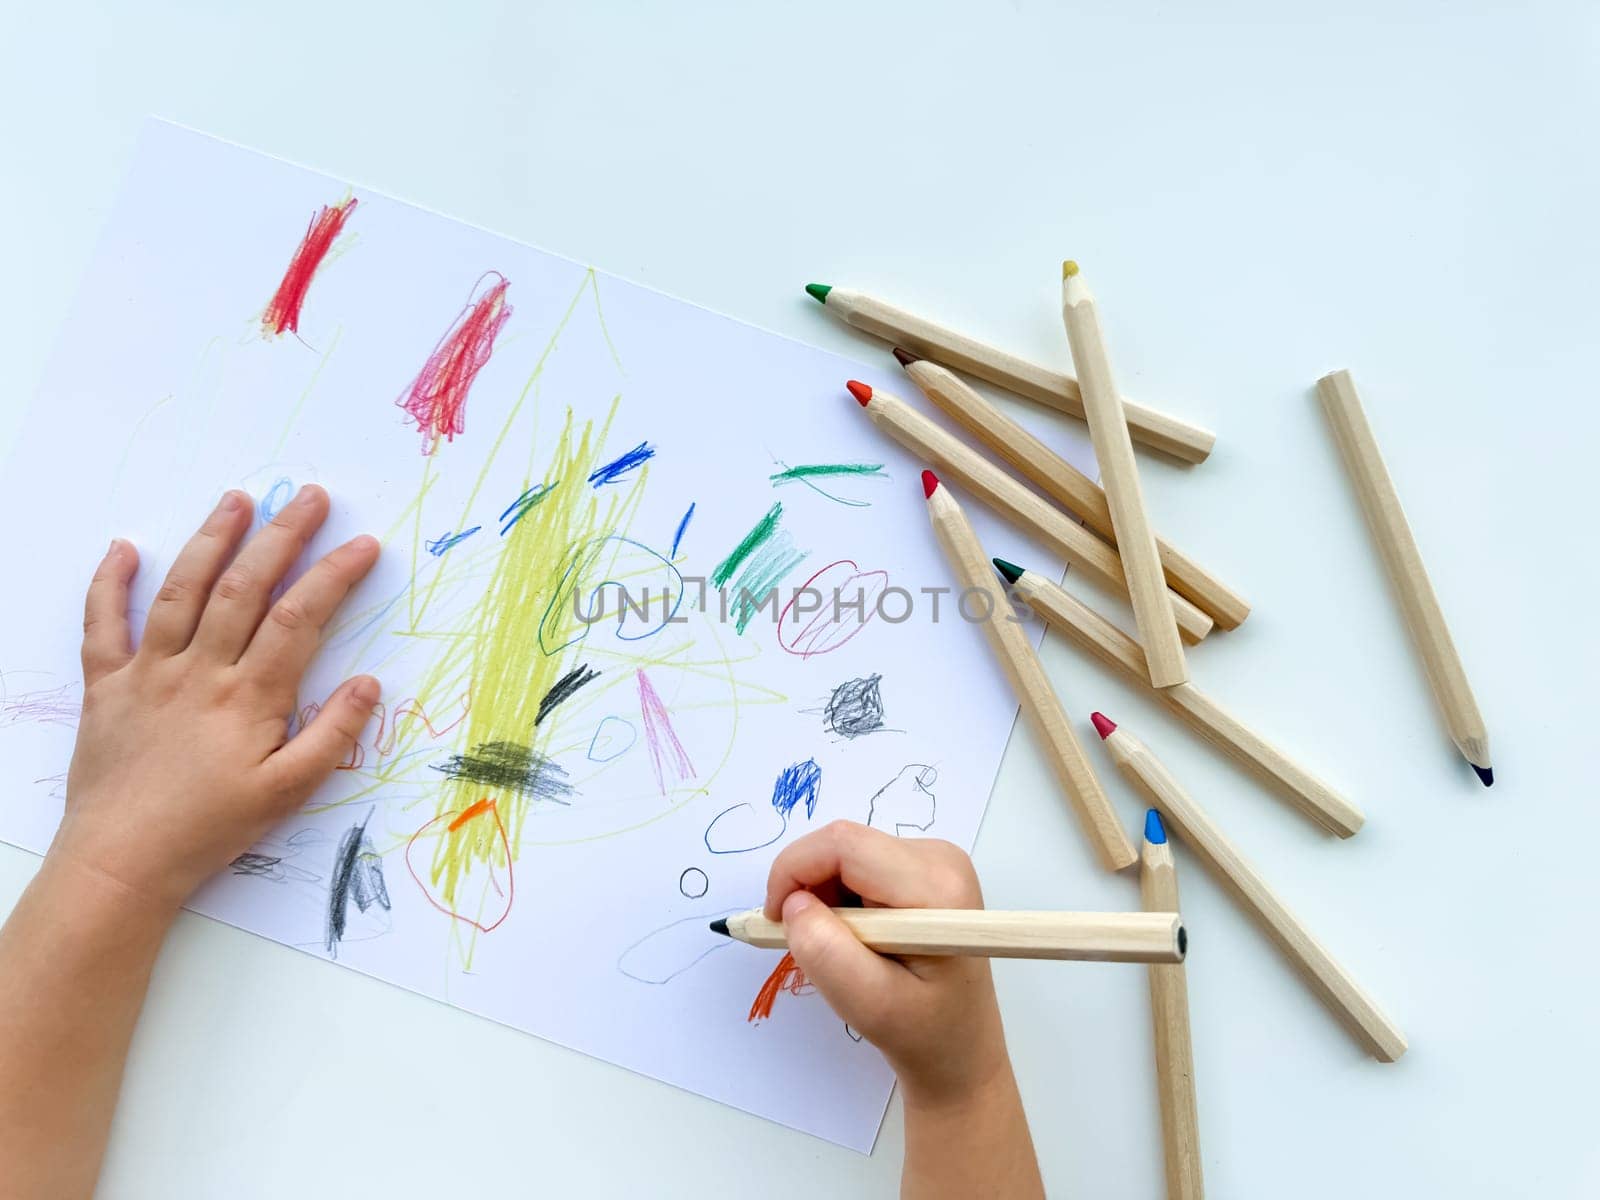 small child draws with colored pencils on paper on white table. High quality photo